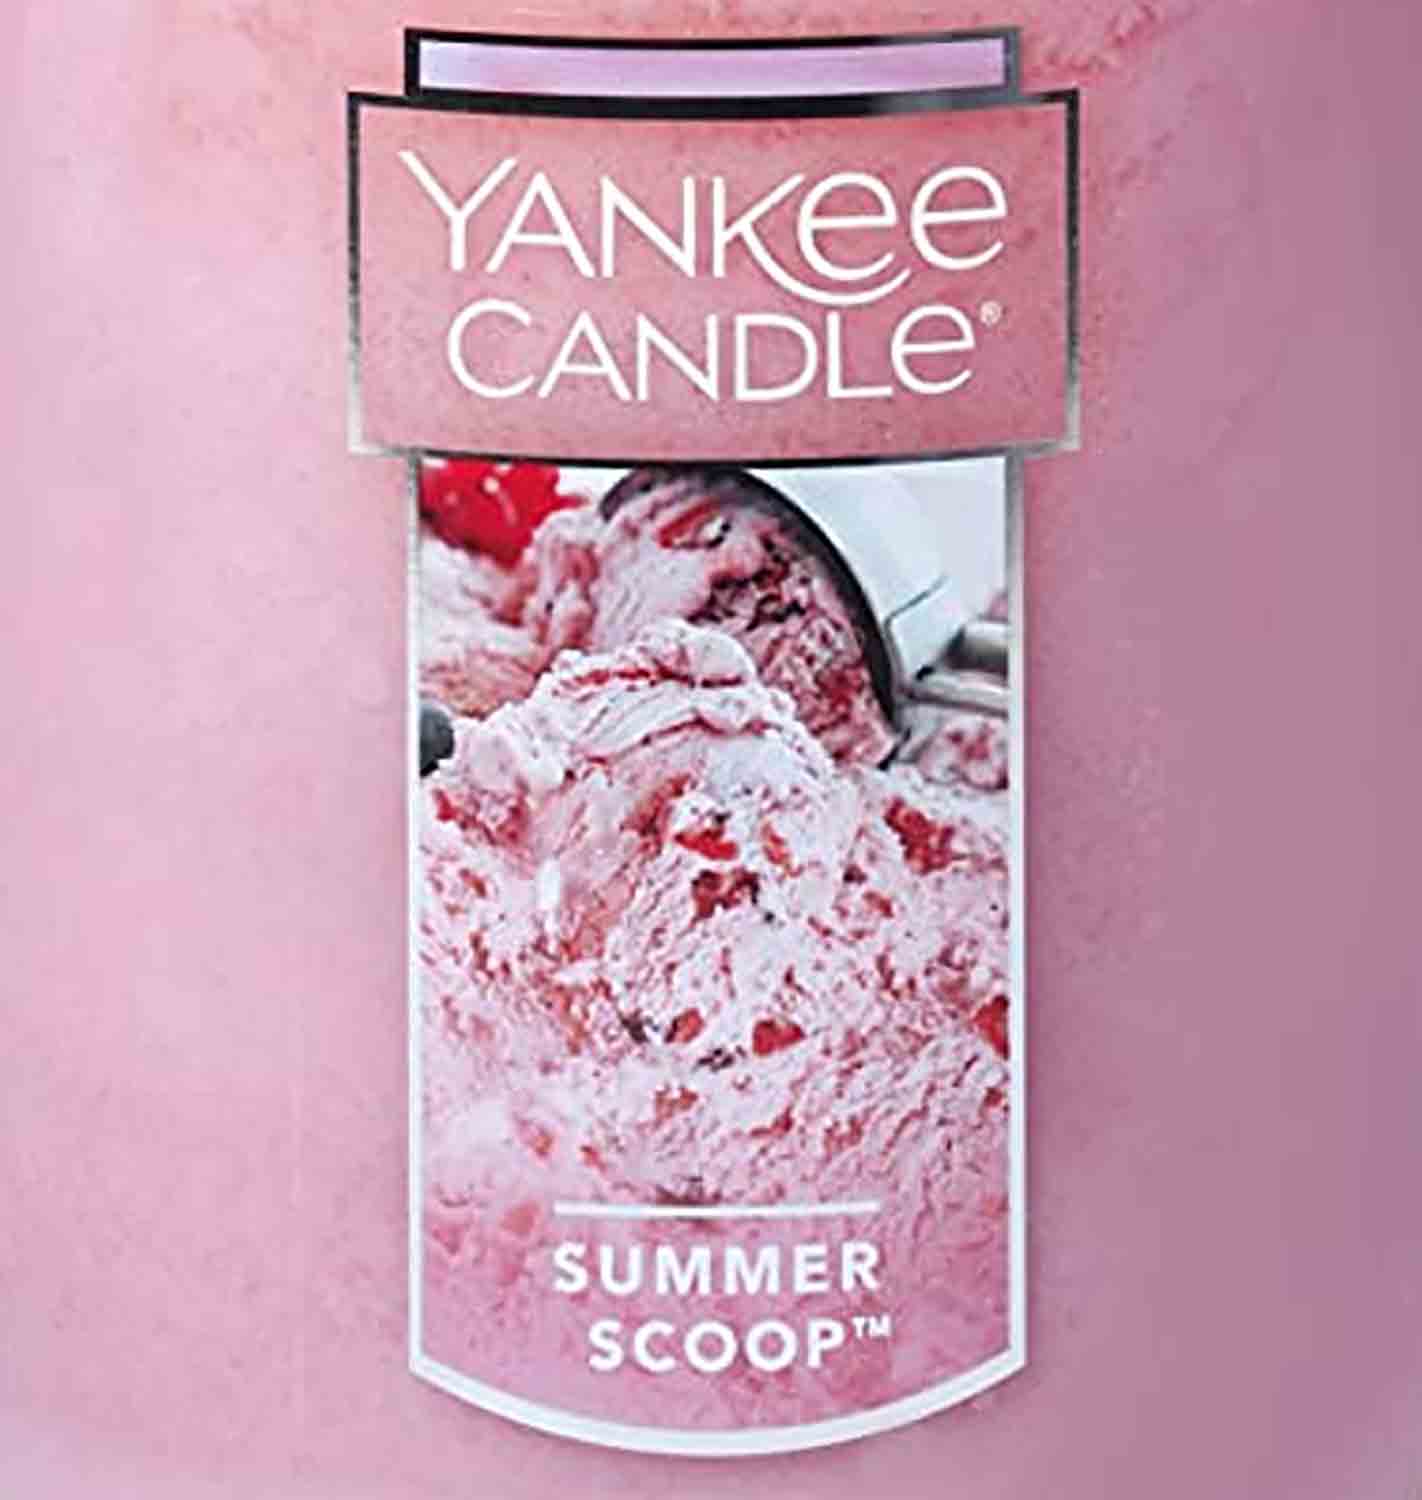 Yankee Candle Summer Scoop 22g - Crumble vosk